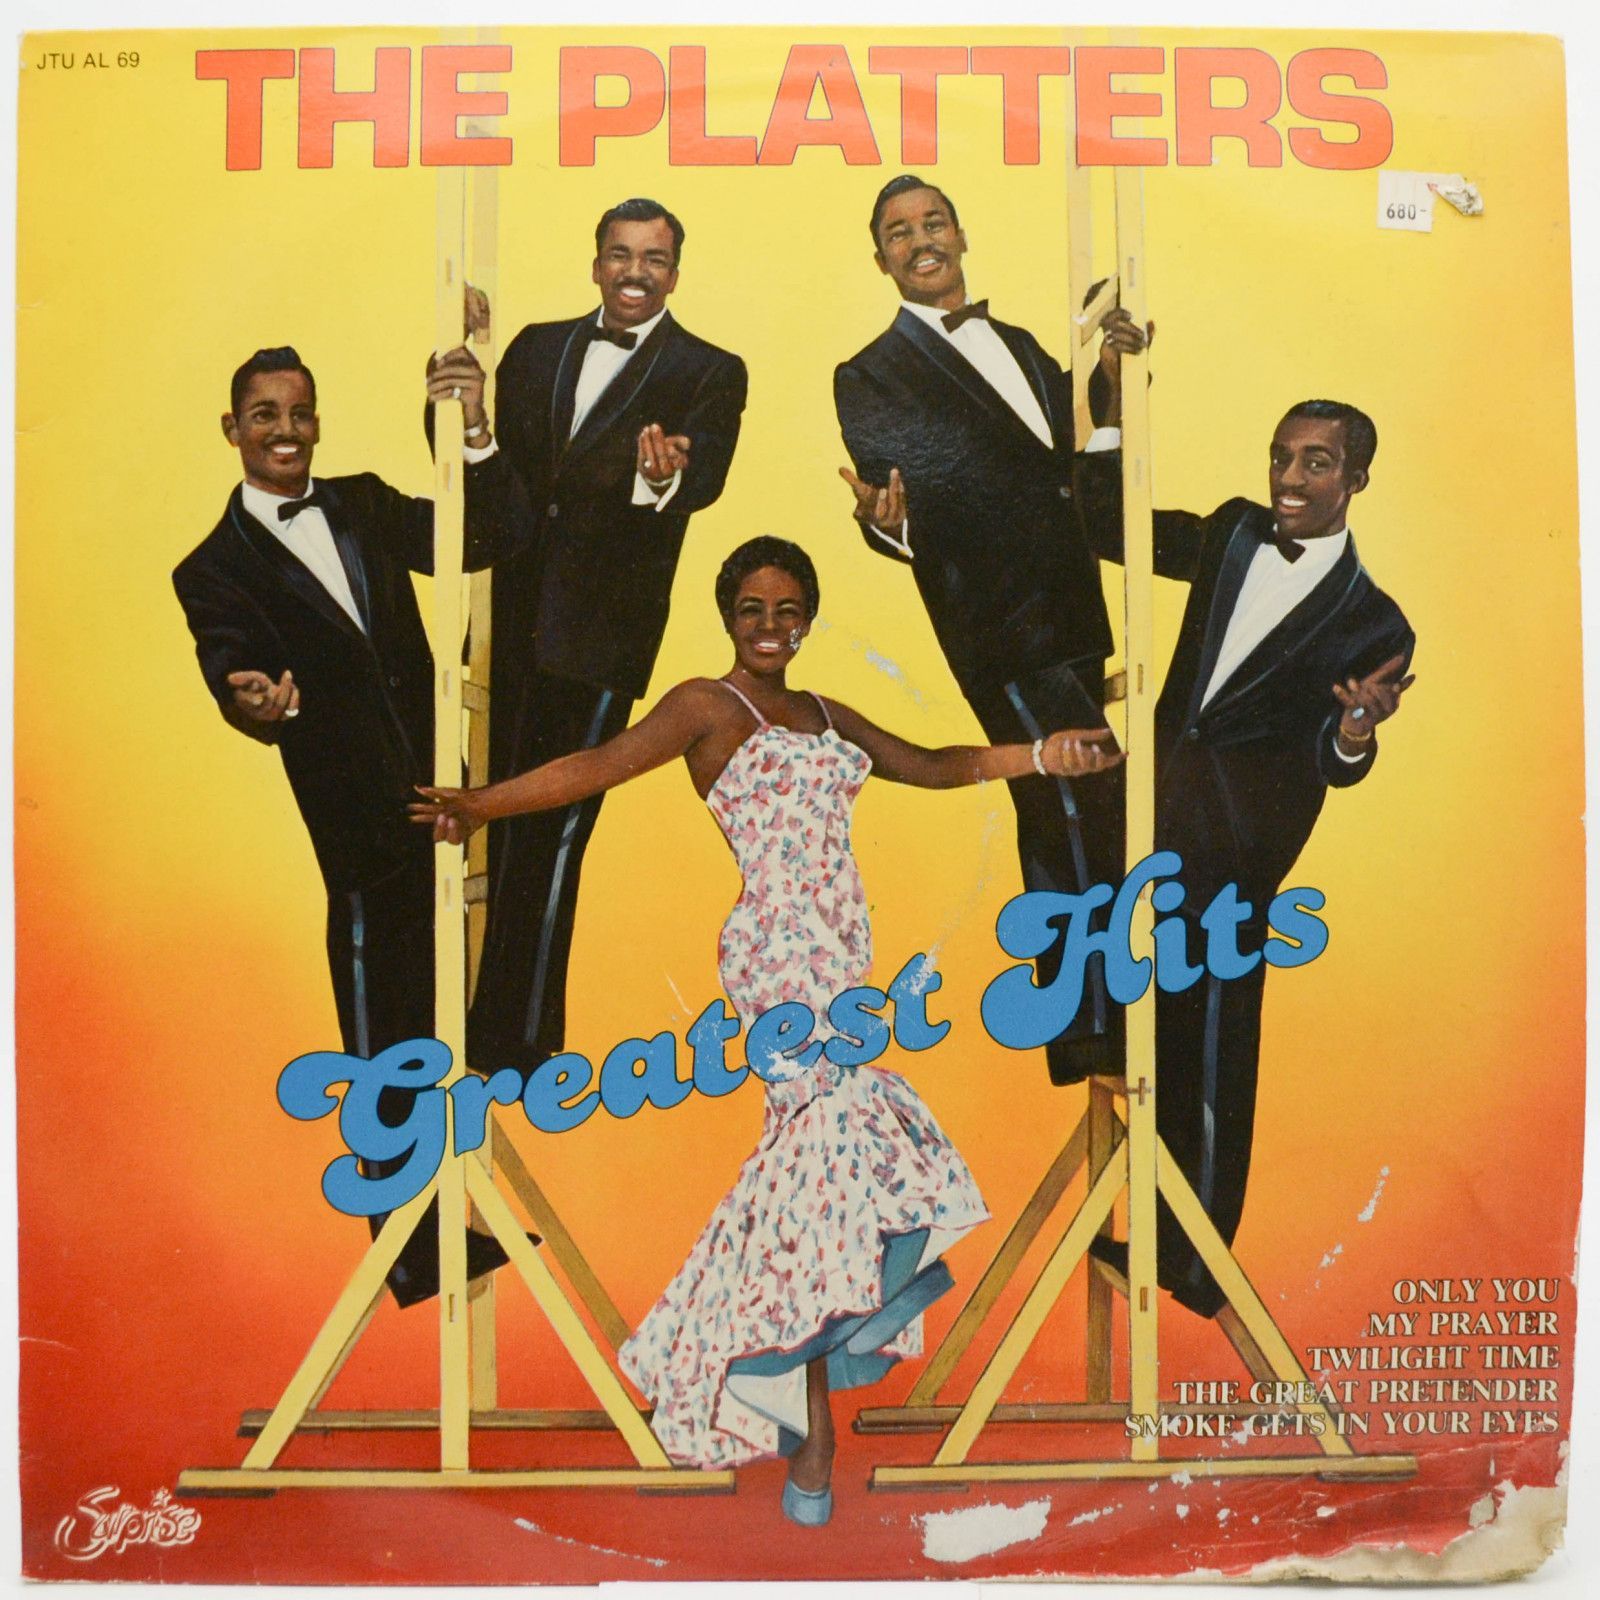 Platters — Greatest Hits, 1981